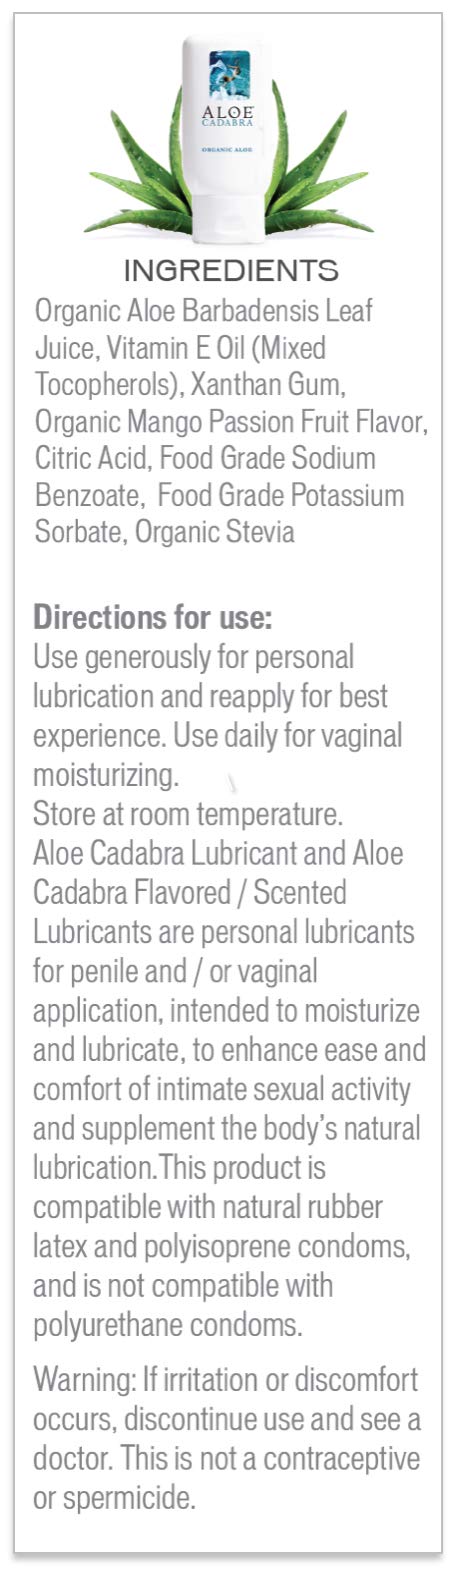 Flavored Personal Lubricant Organic, Natural Mango Passion Lube, Oral, Women, Men & Couples, 2.5 Ounce Aloe Cadabra